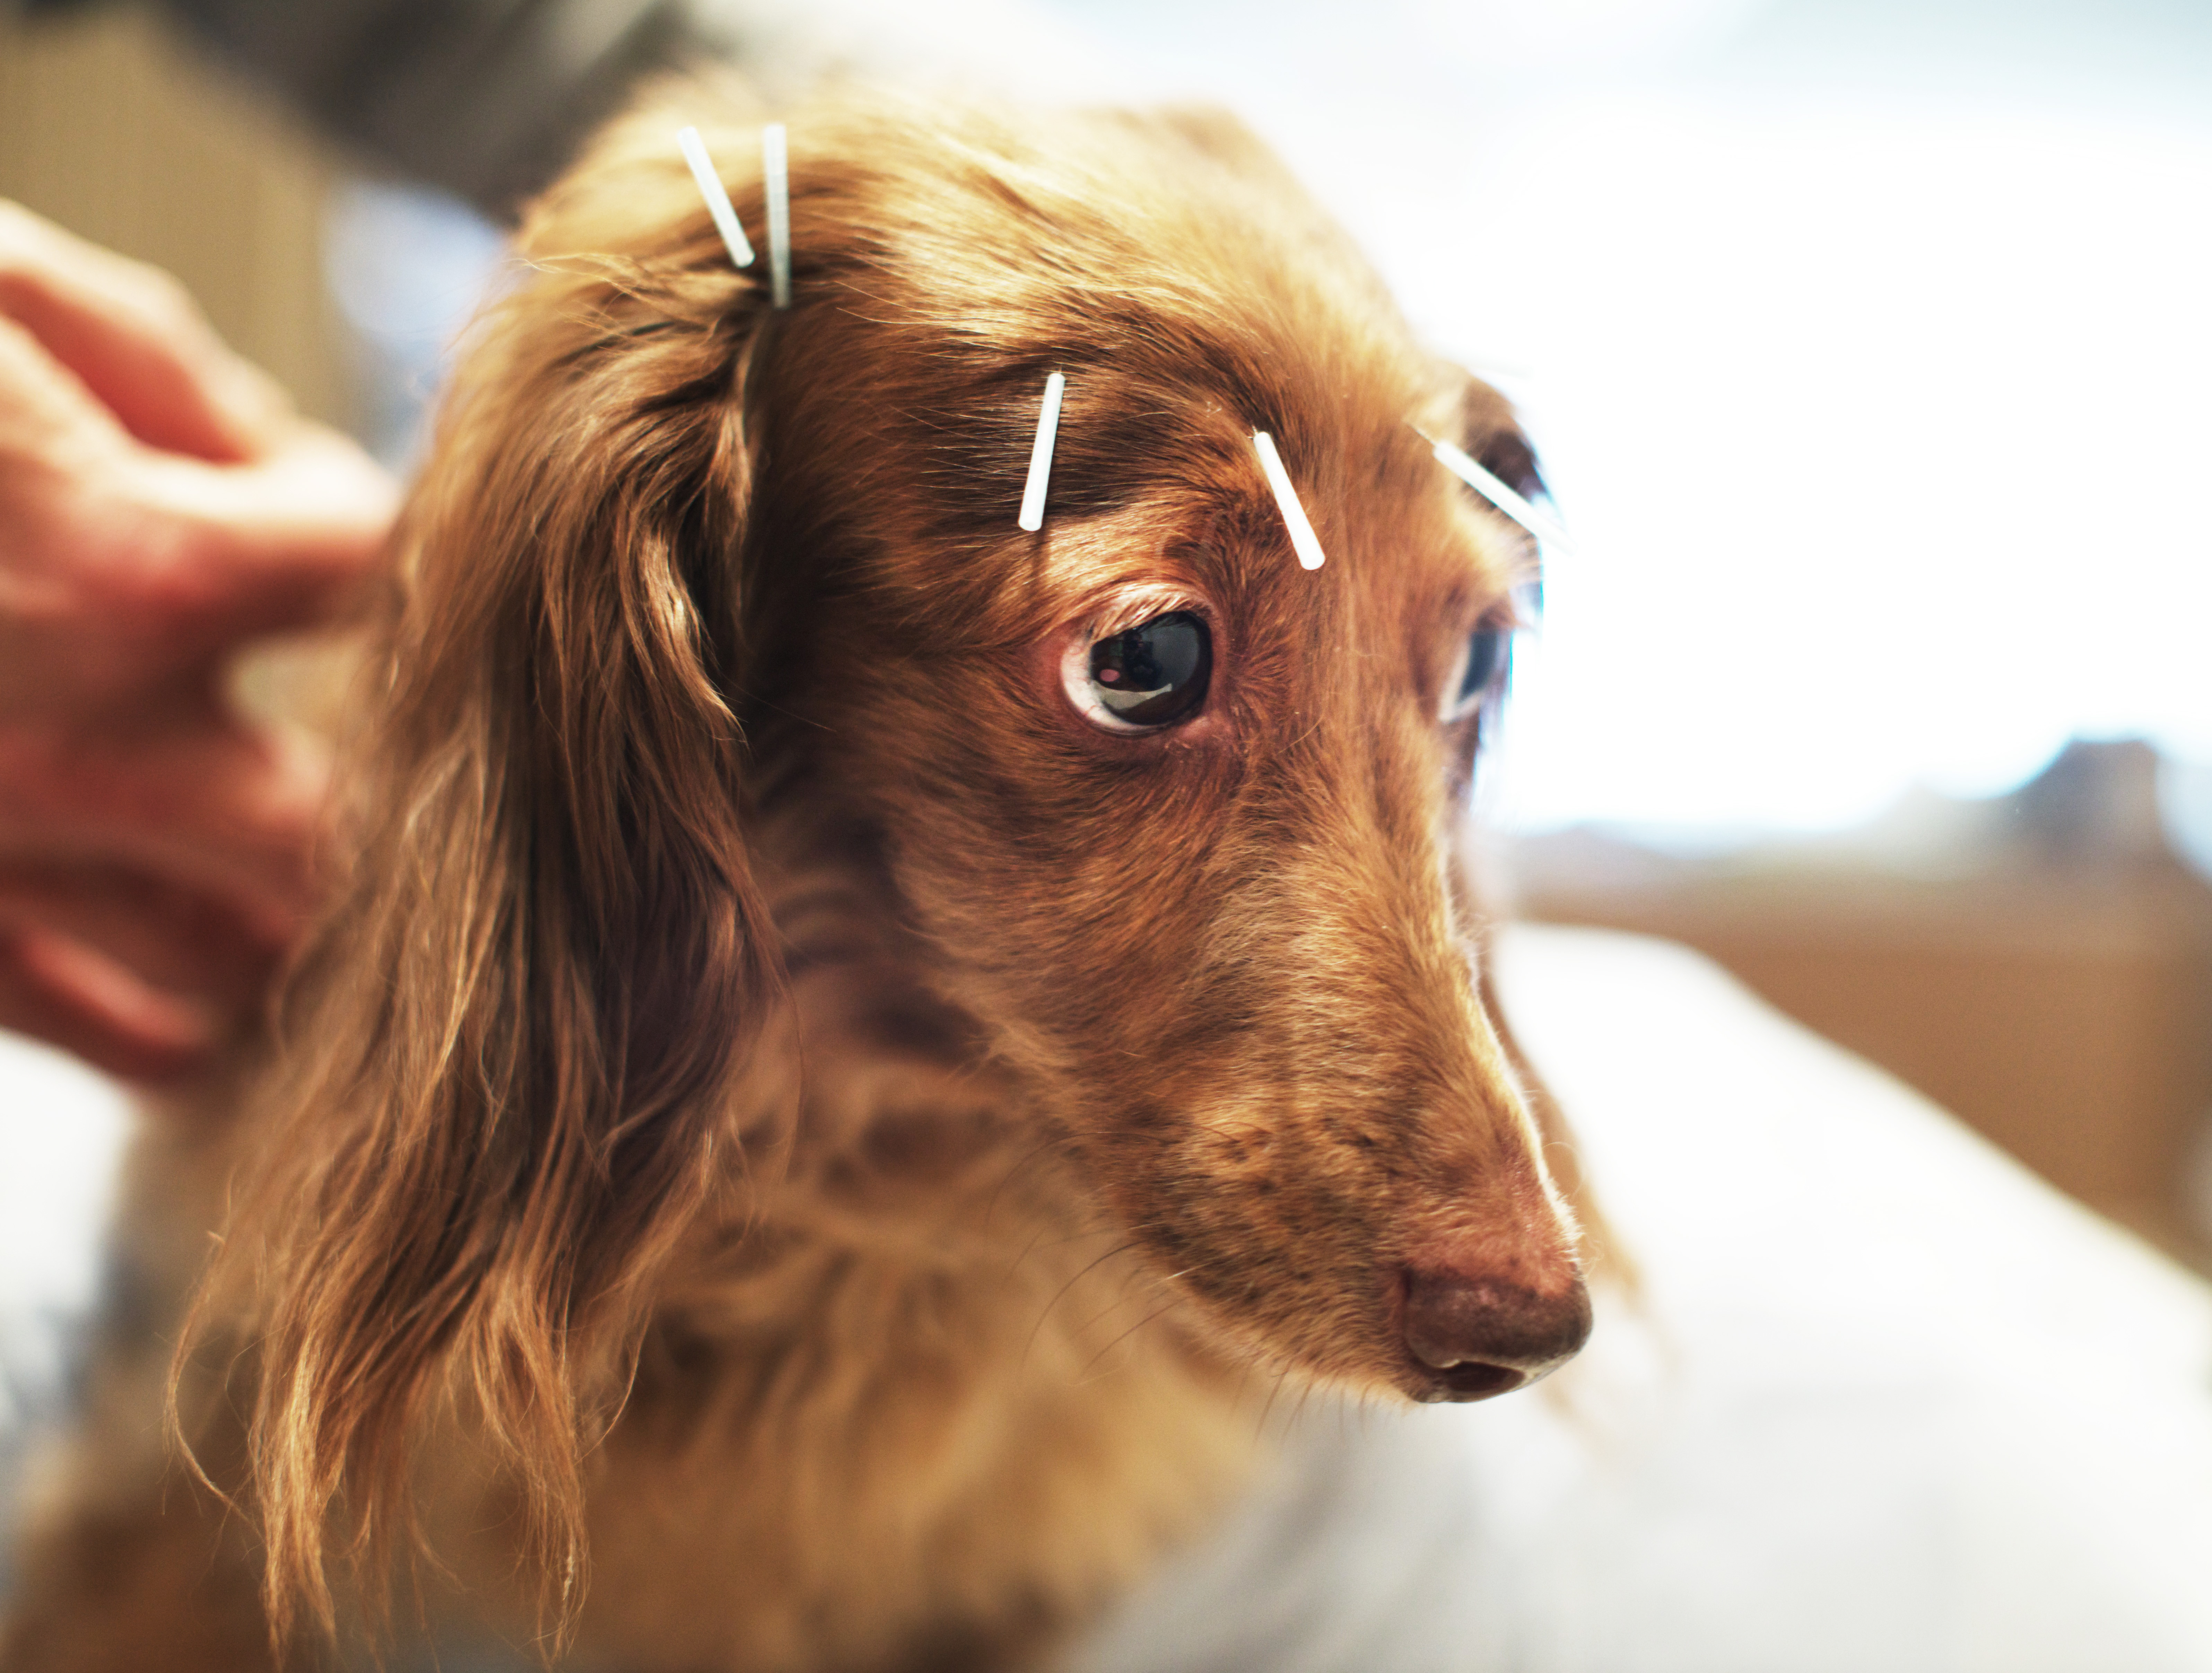 Is your pup in pain? More pet owners turn to acupuncture for treatment